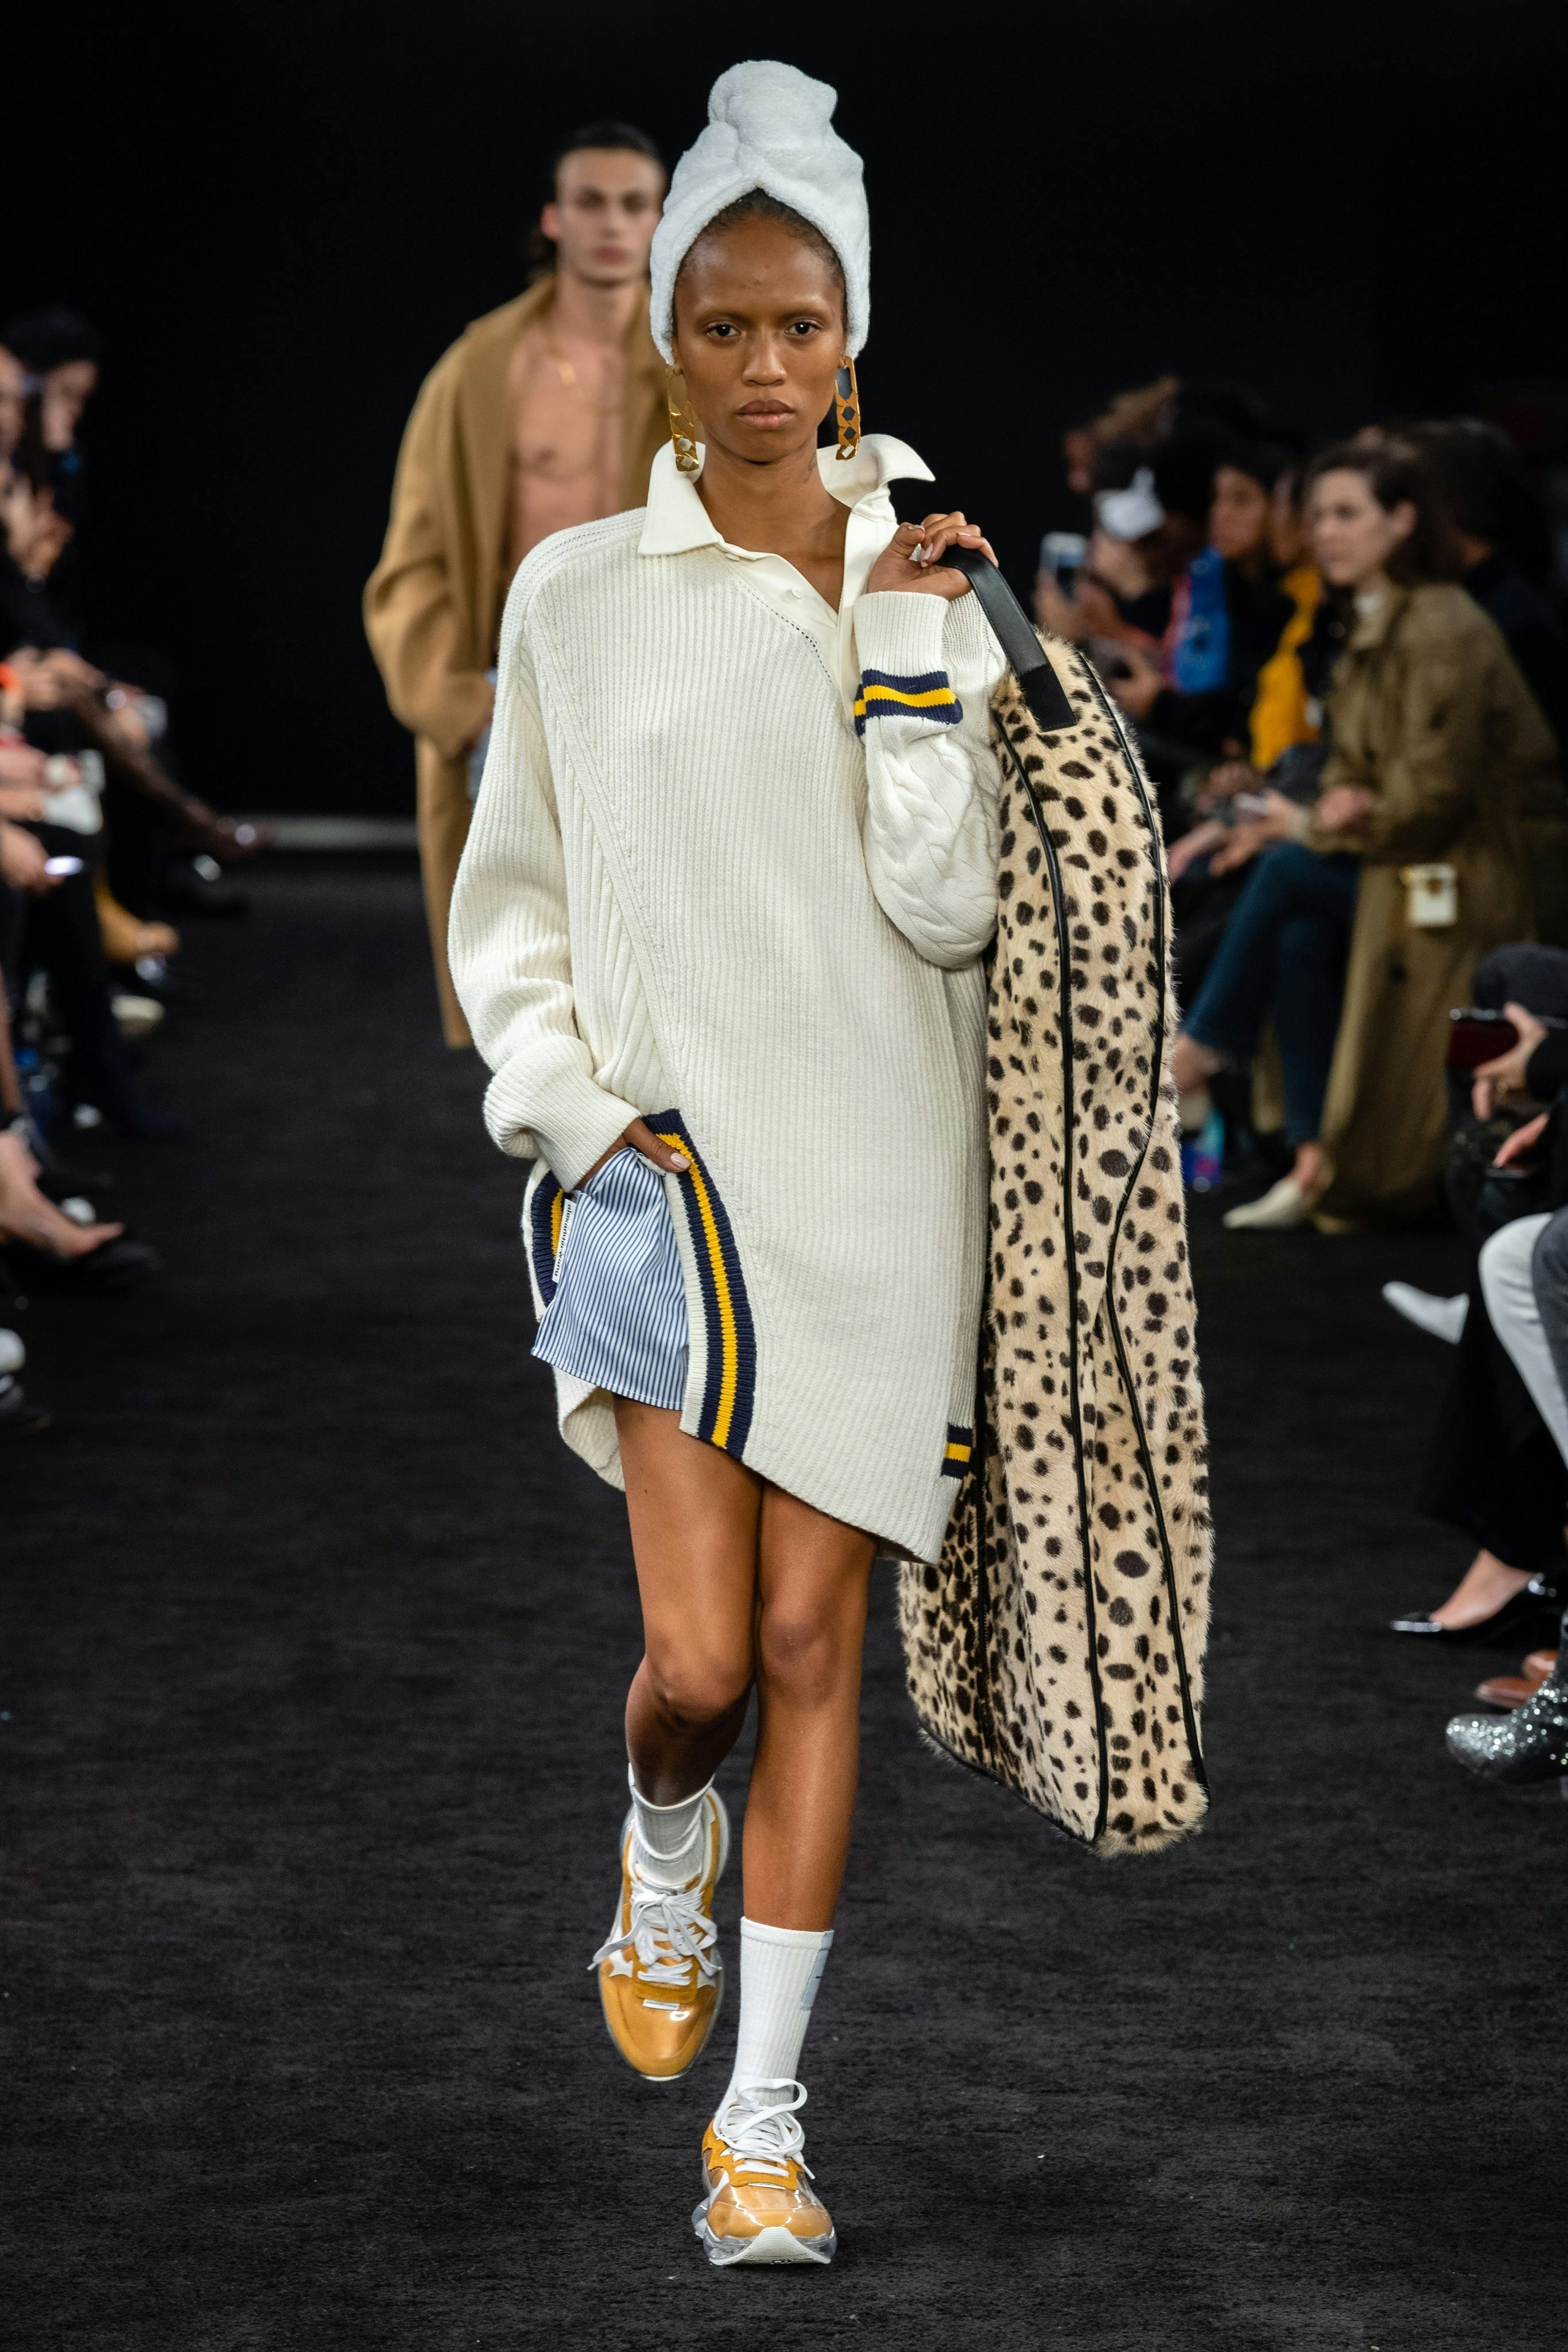 Alexander Wang Pays Tribute to Calvin Klein, Donna Karan and Ralph Lauren  in Spring 2020 Show—And Introduces Pete Davidson to the Runway